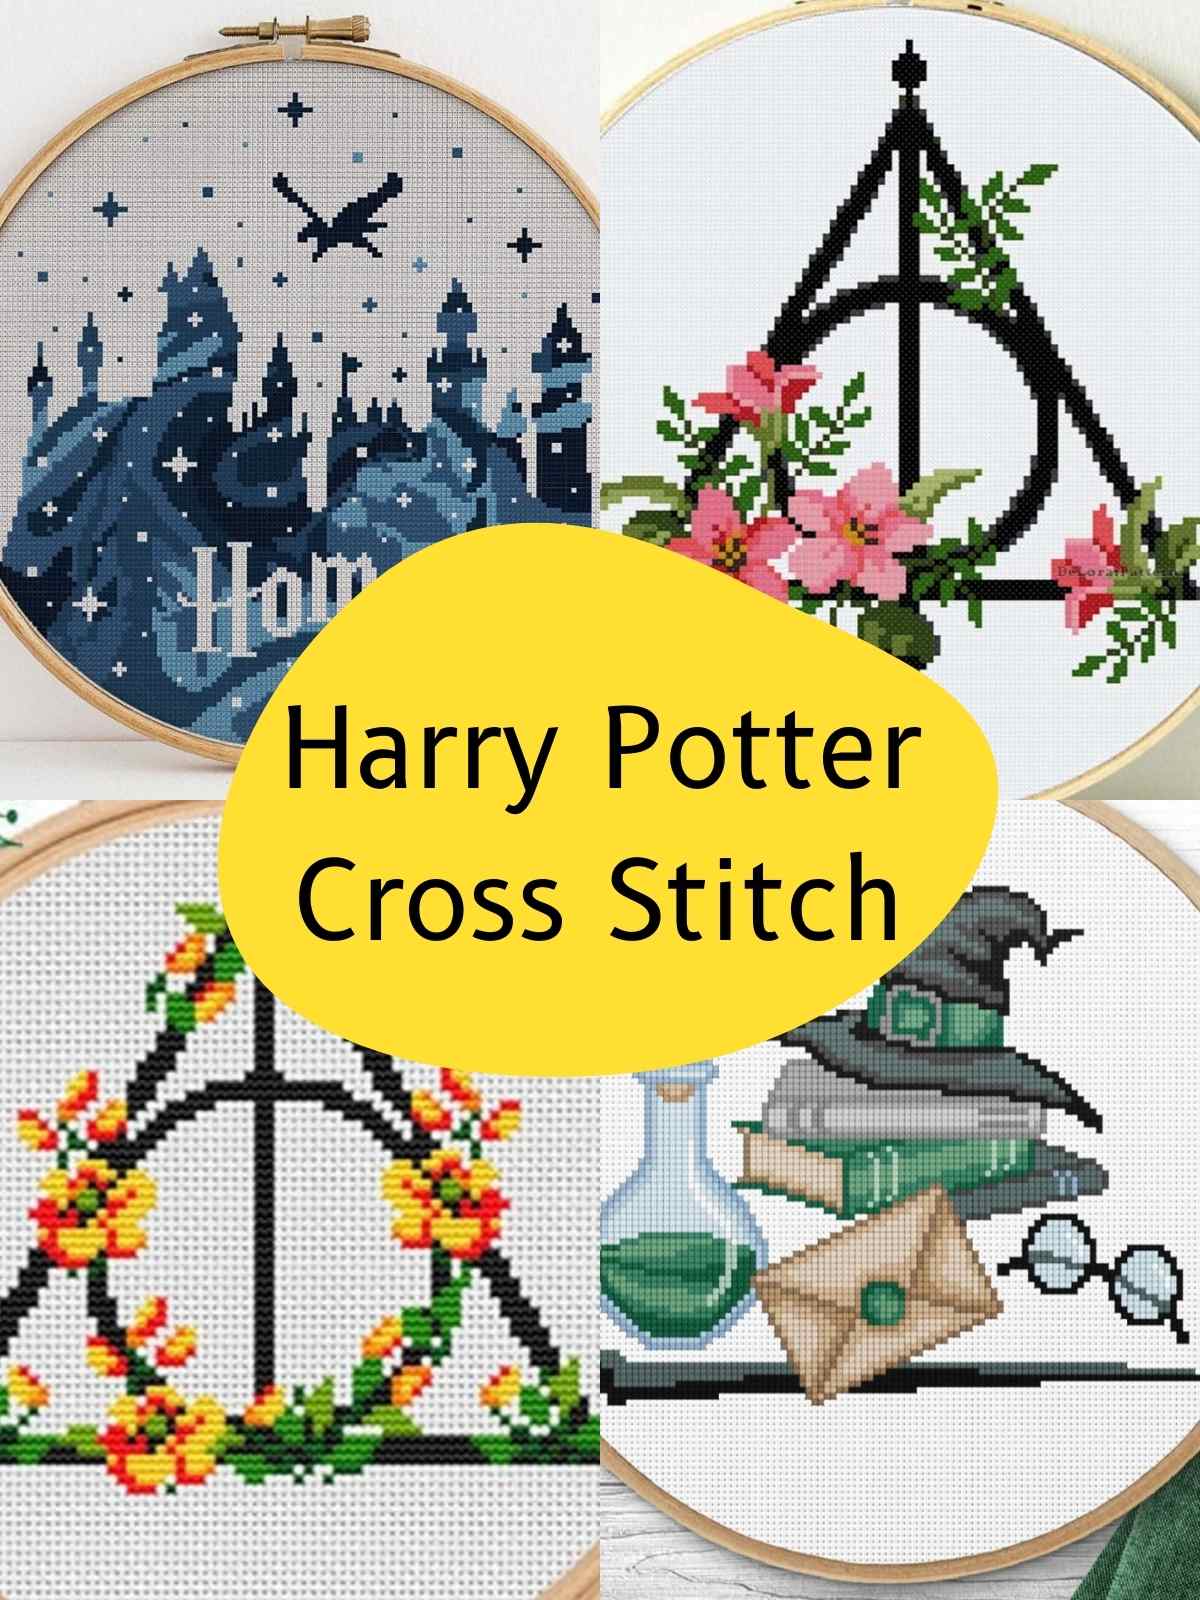 Harry Potter patterns for embroidery and cross stitch 